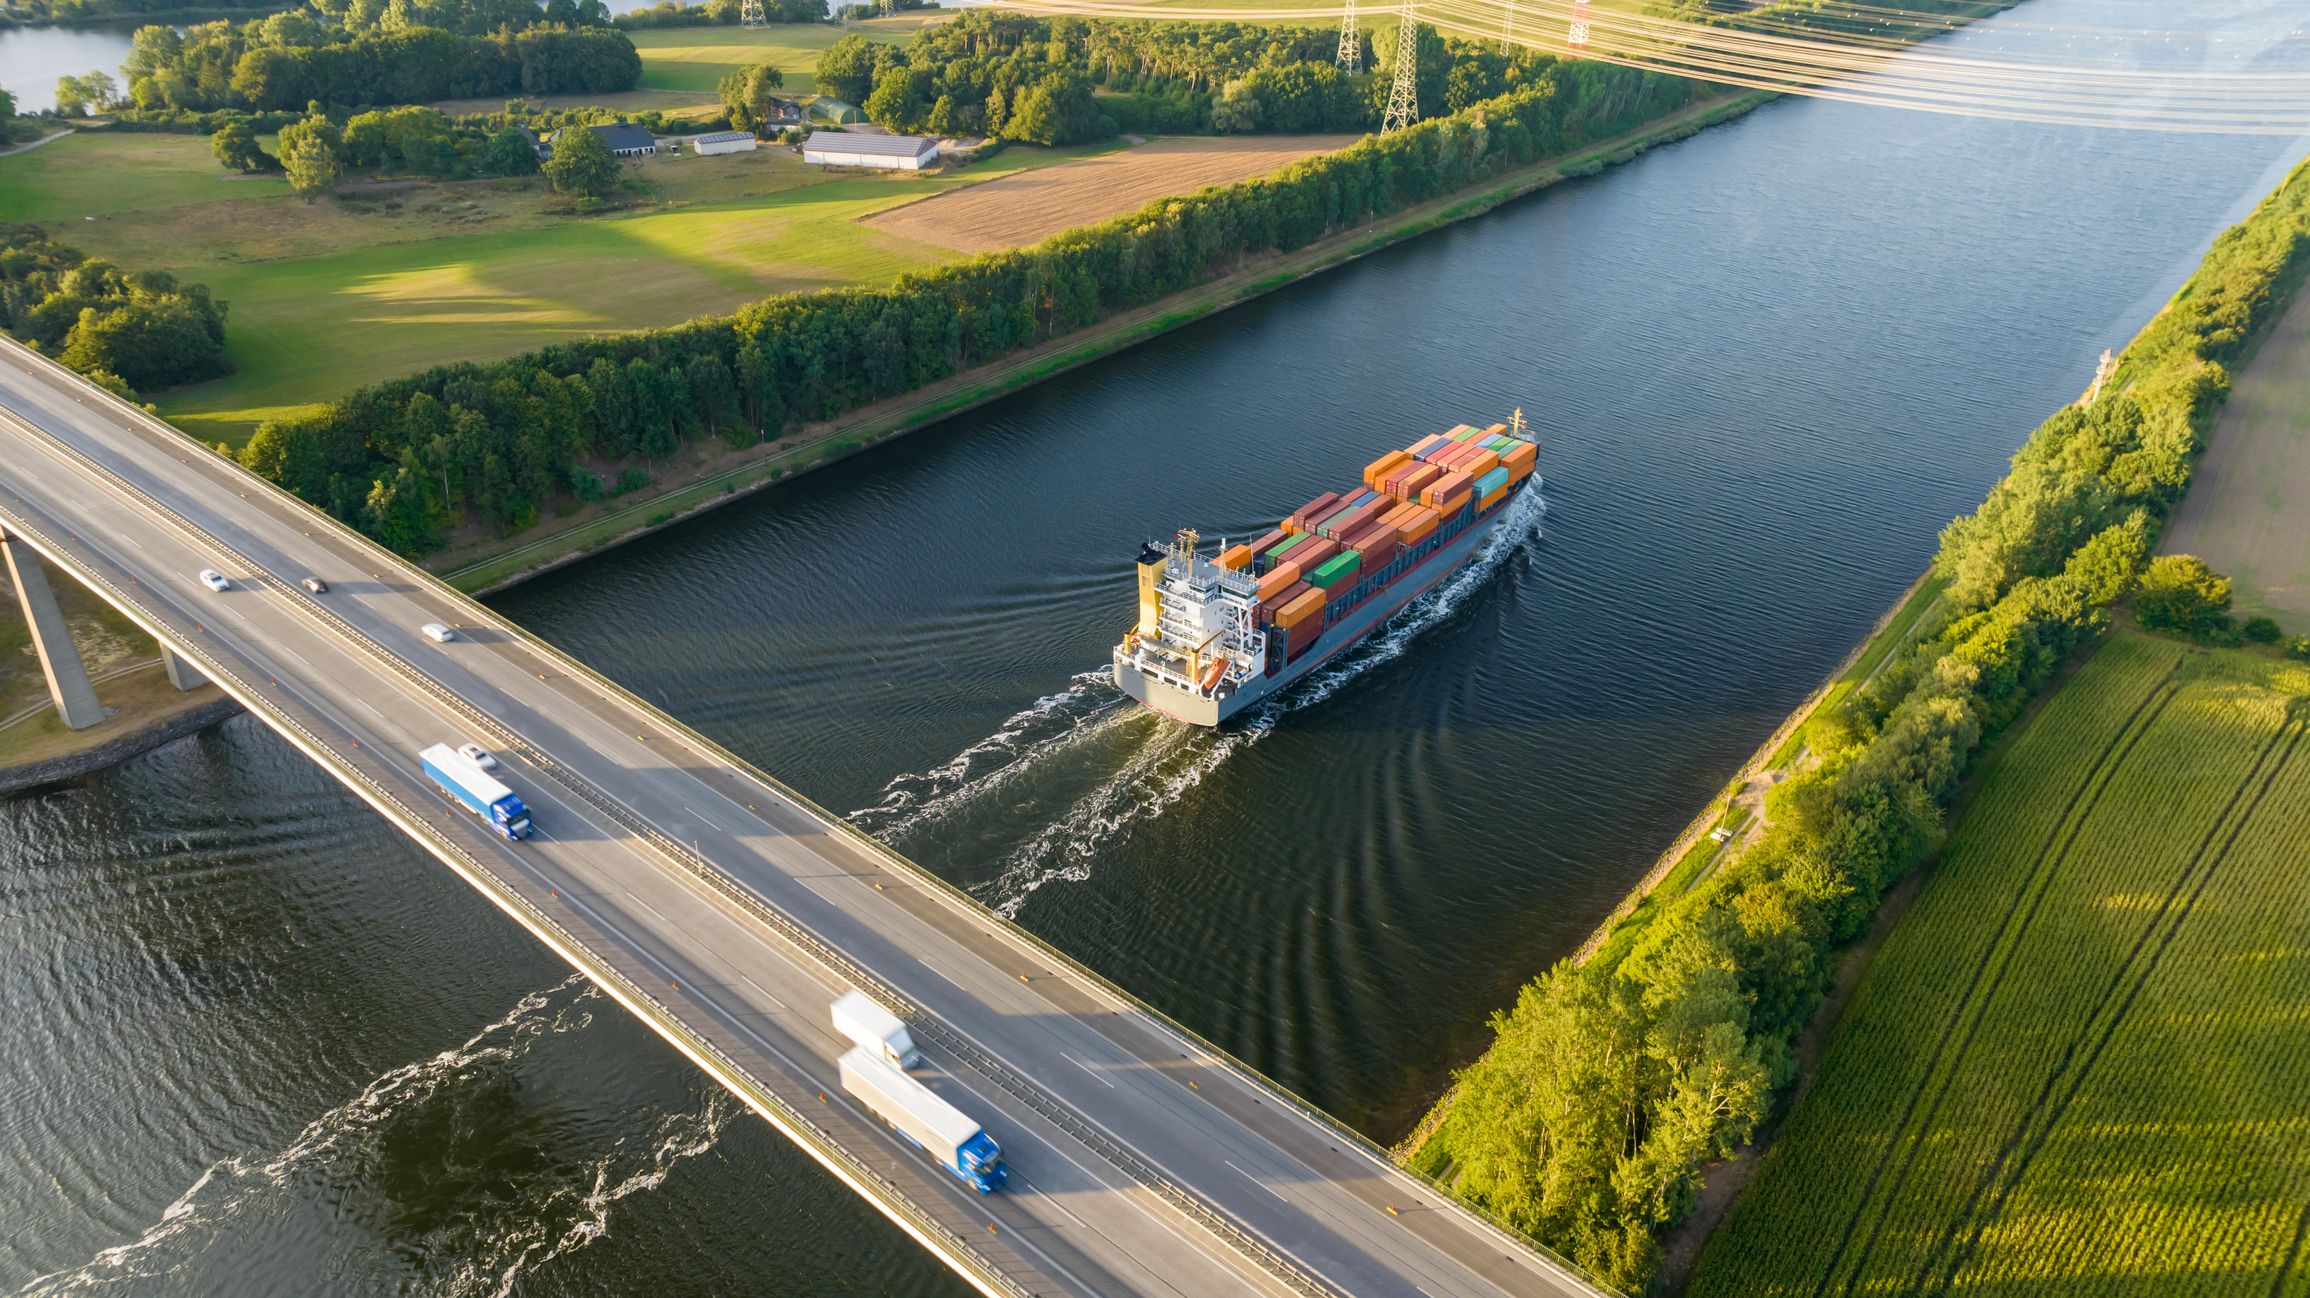 By 2030, the goal is to shift 30% of road freight traffic over long distance to more sustainable solutions, such as inland waterways or railway. (Getty Images)